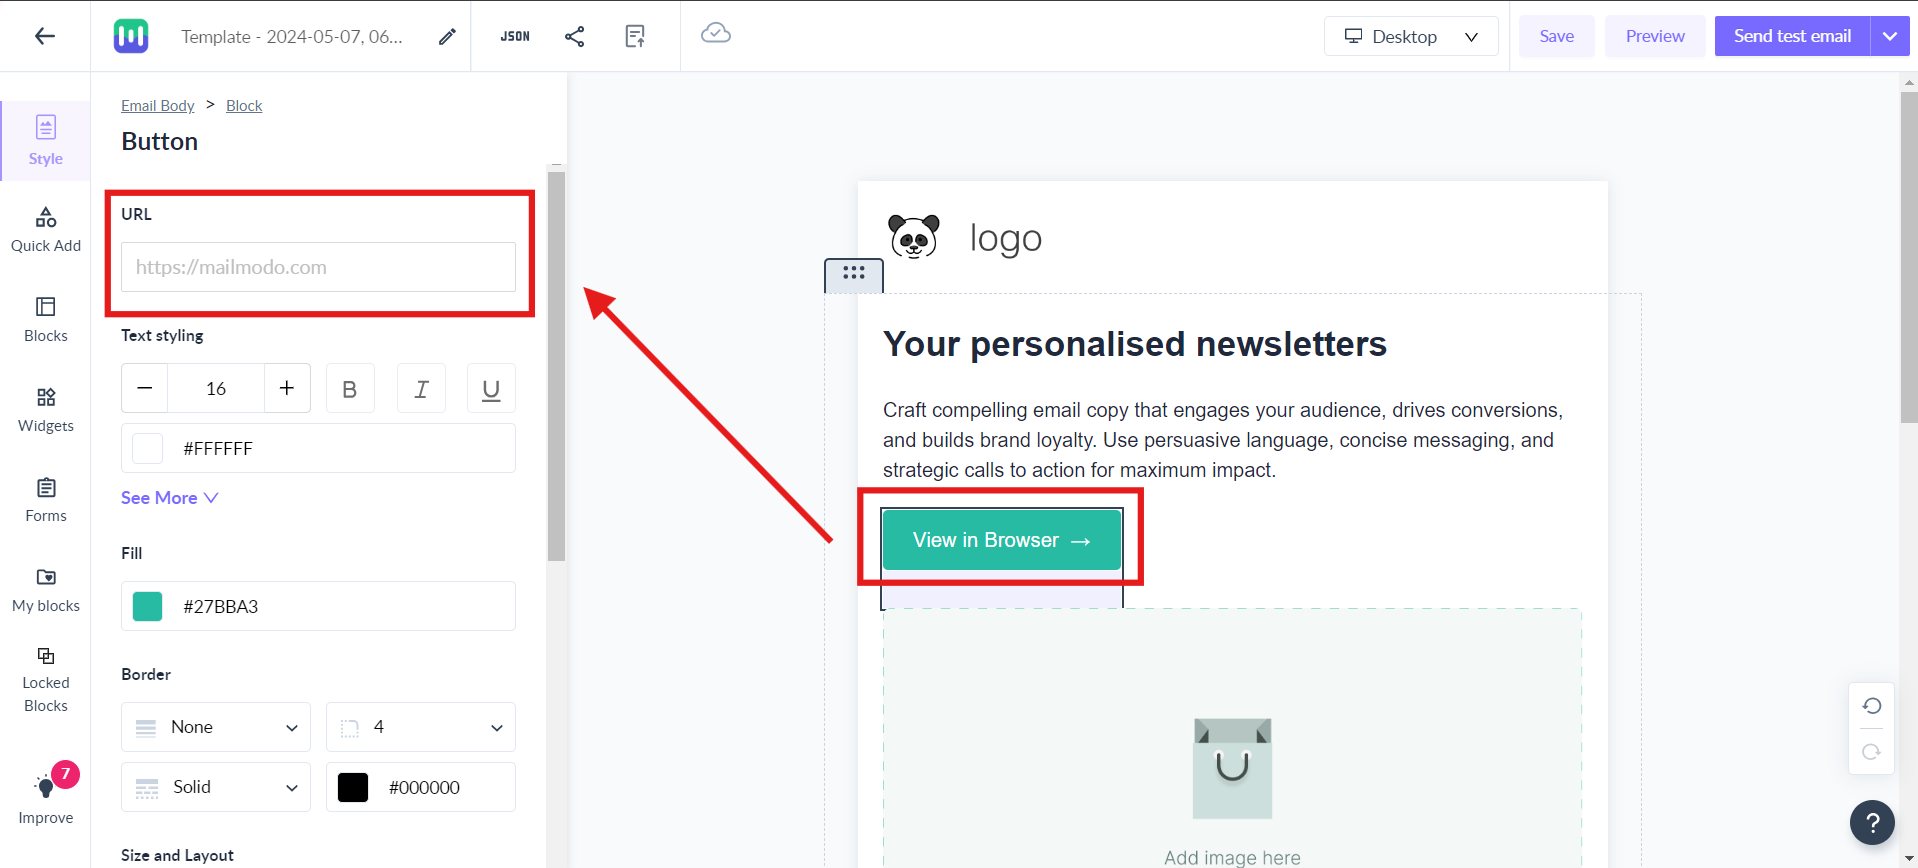 How to add UTM parameters in Email templates in Mailmodo